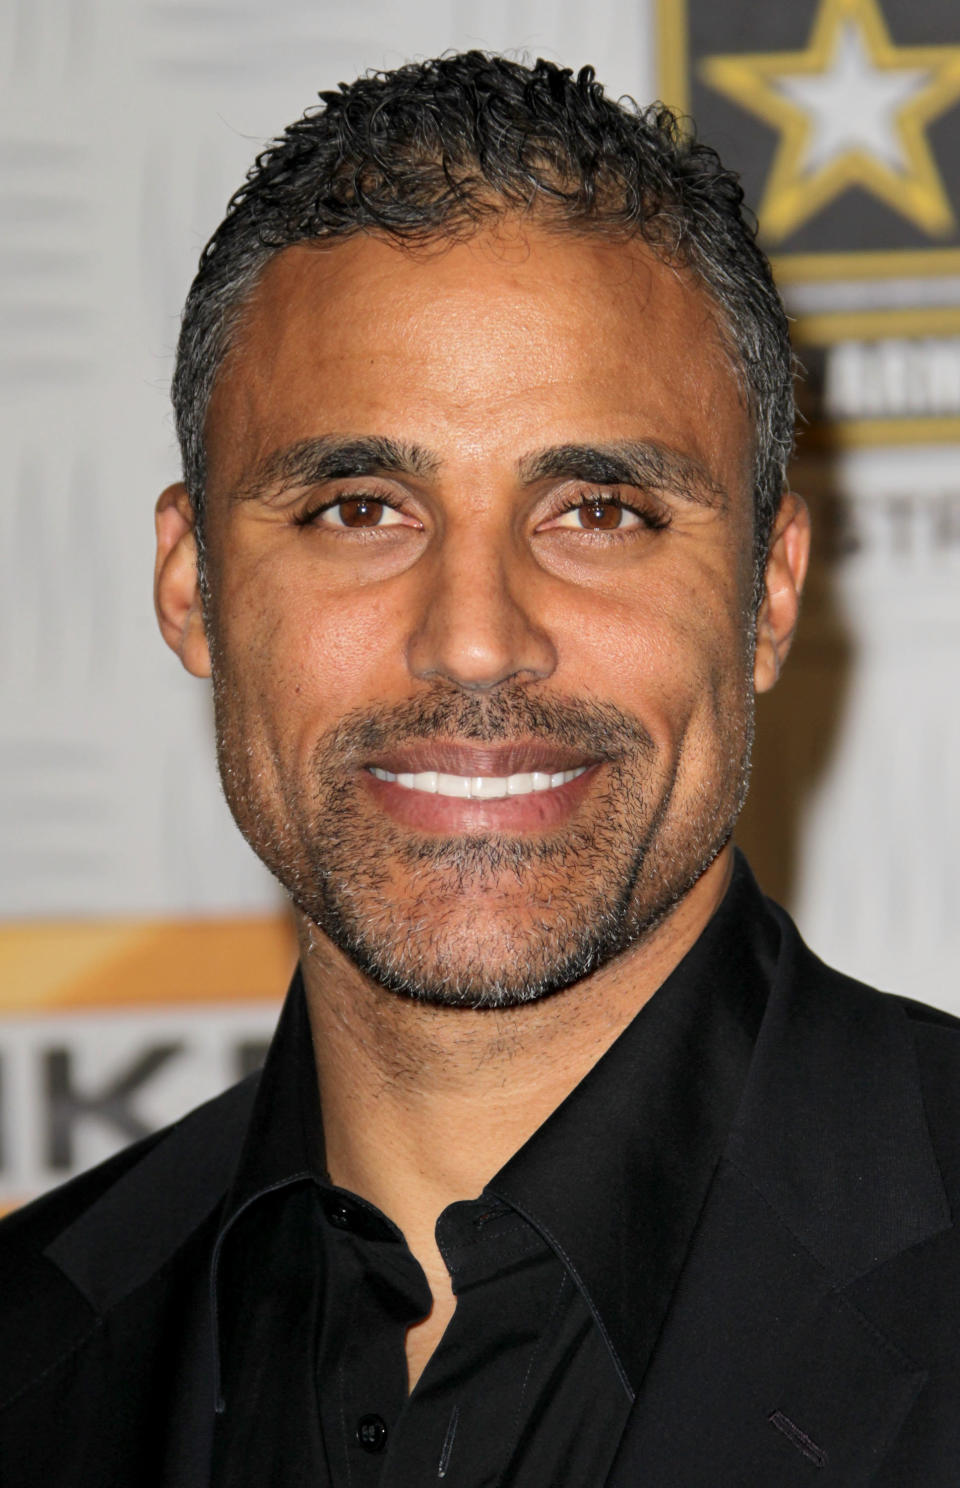 Although he hasn’t explicitly said anything about gay rights, retired three-time NBA champion Rick Fox, appeared as a guest judge on <a href="http://www.logotv.com/video/episode-2-season-4-wtf-wrestlings-trashiest-fighters/1678533/playlist.jhtml#vid=721347">“RuPaul’s Drag Race” season four</a>. Plus, his former ex, Vanessa Williams (gay icon, at least to Raja, Drag Race season three winner) was also on the show the season before. If this isn’t a sign of LGBT support, what is?